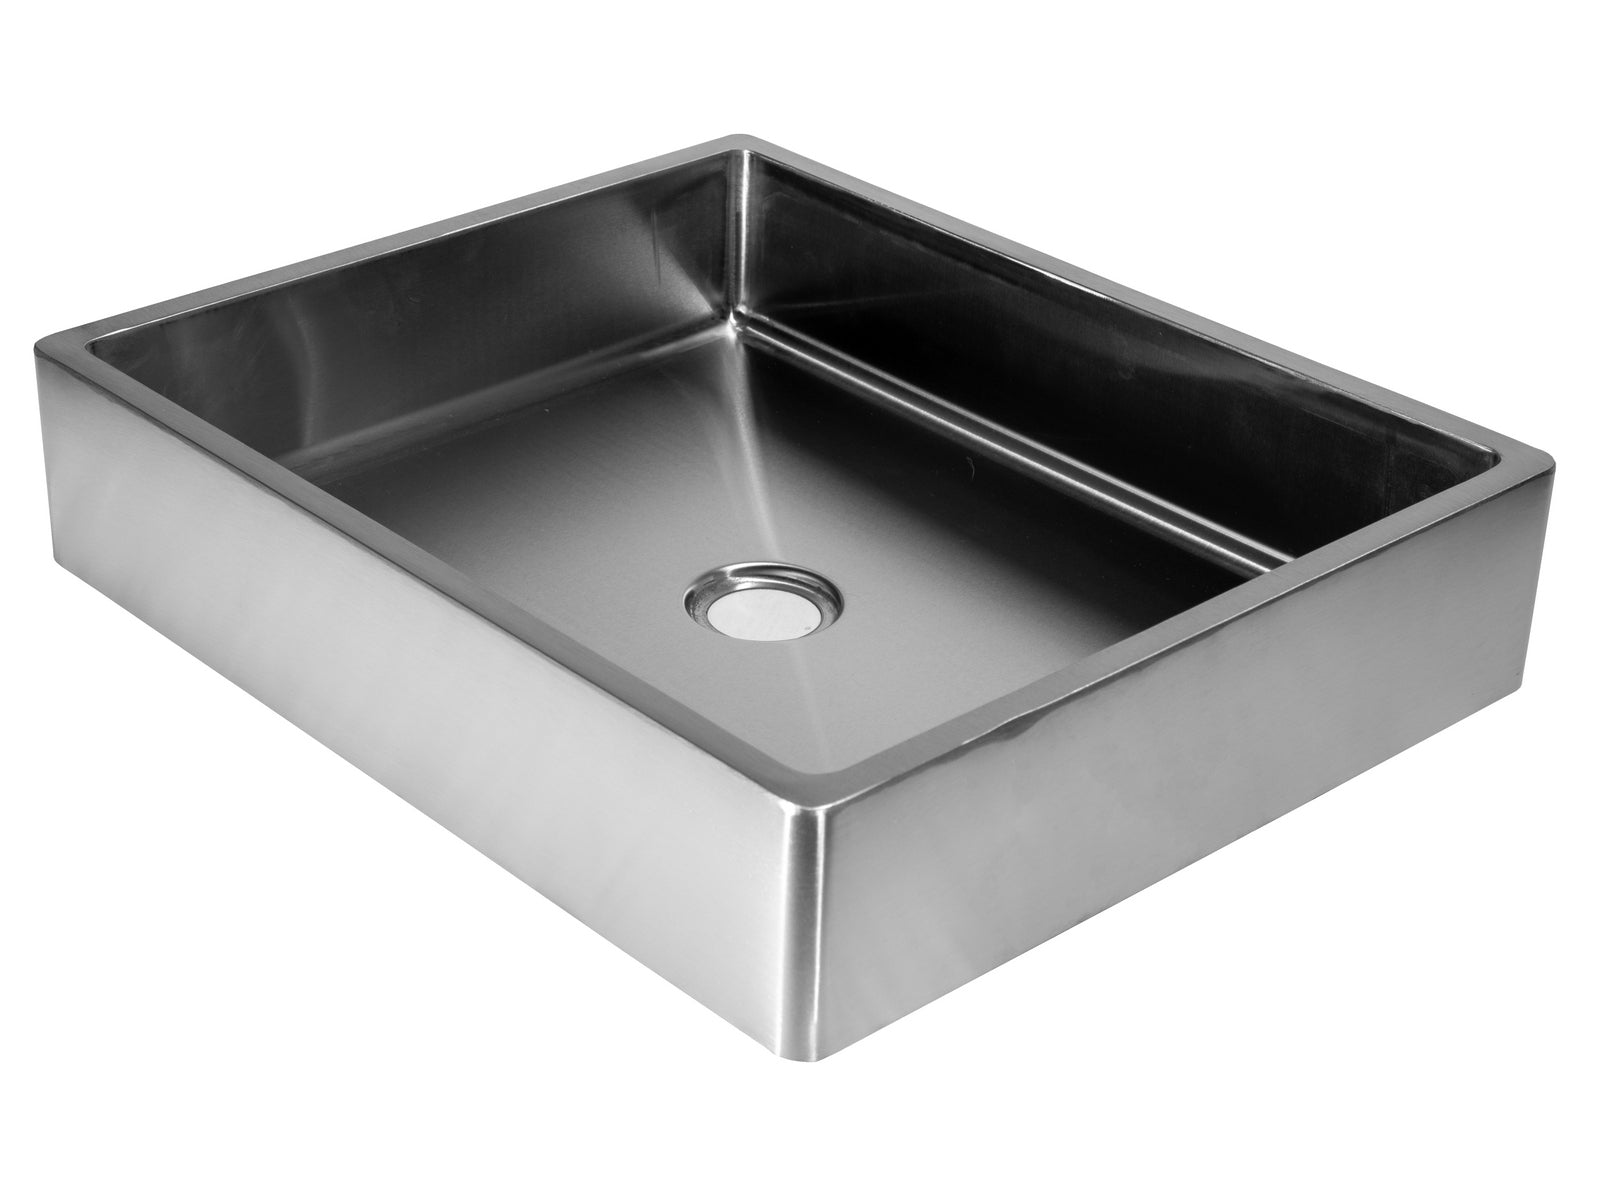 Rectangular 18 3/4" x 15 3/4" Thick Rim Stainless Steel Bathroom Vessel Sink with Drain in Silver